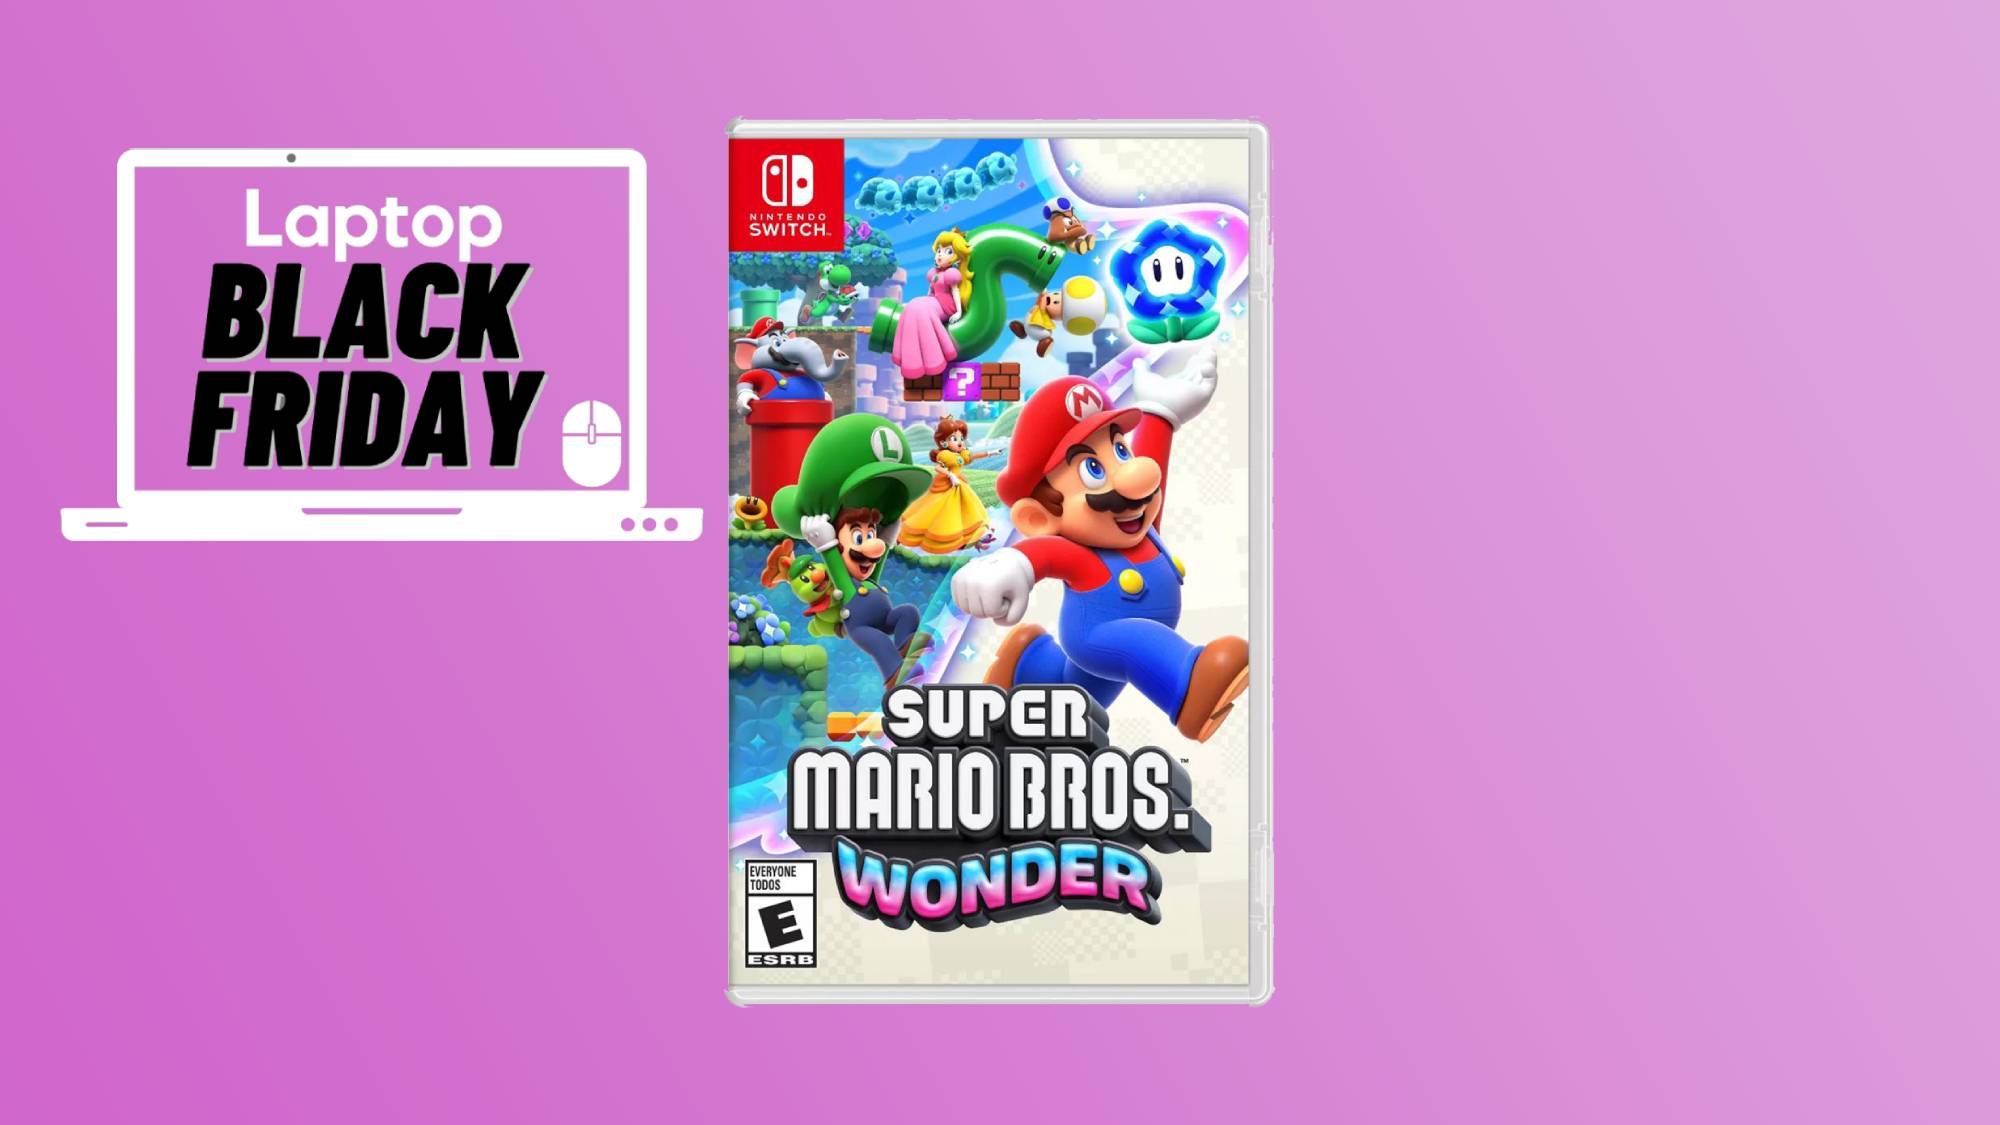 Nintendo Switch Black Friday Promos Have Been Announced—Here's